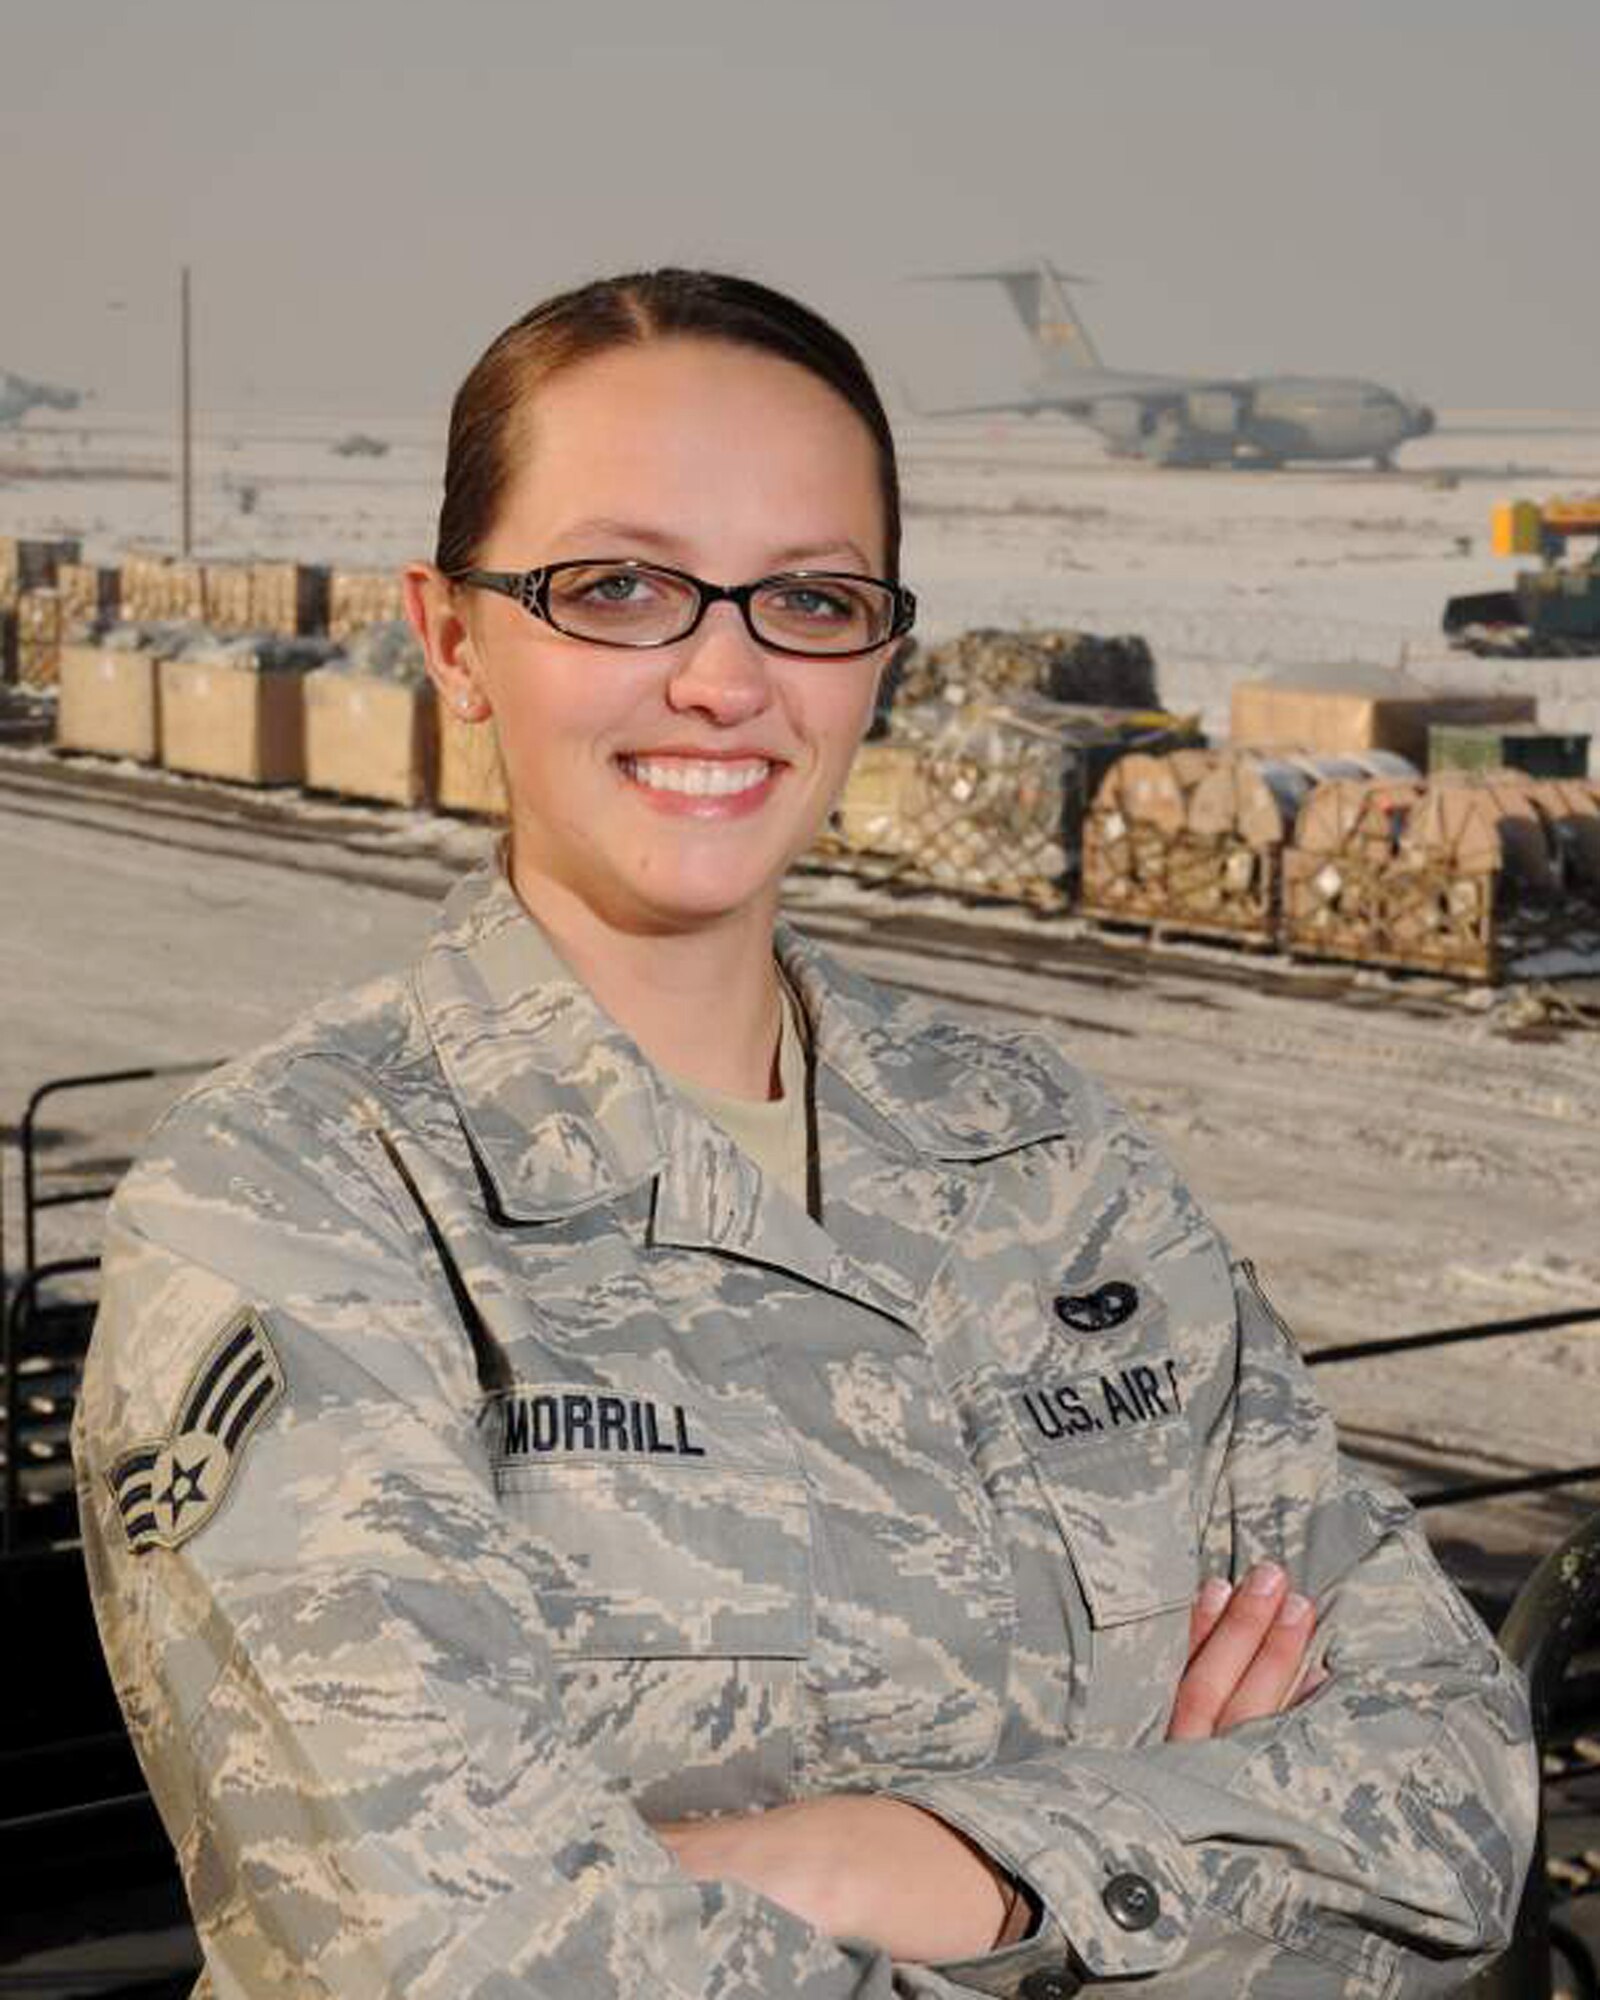 Senior Airman Kathryn Morrill of the small air terminal at the 133rd Logistics Readiness Squadron pauses near the flightline of a deployed location in November 2010 where she was working loading aircraft in support of Operation Enduring Freedom and Operation New Dawn. Morrill has been selected to represent Minnesota as the Air Guard Outstanding Airman for 2011.